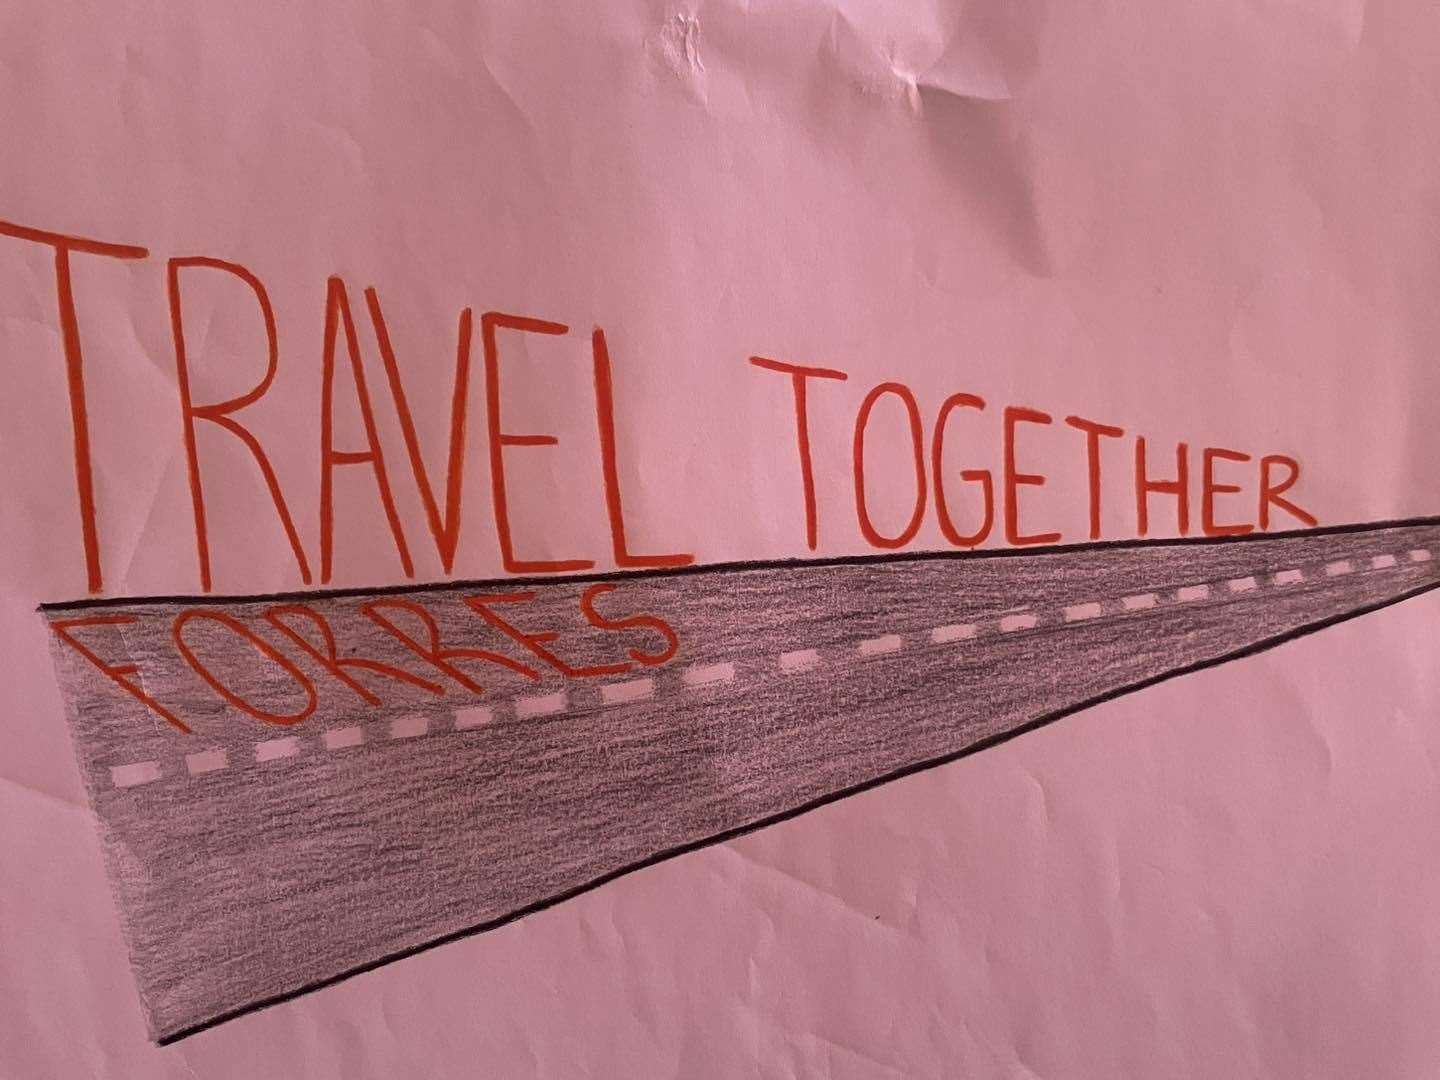 Travel Together Forres by Isabella from Drumduan School.